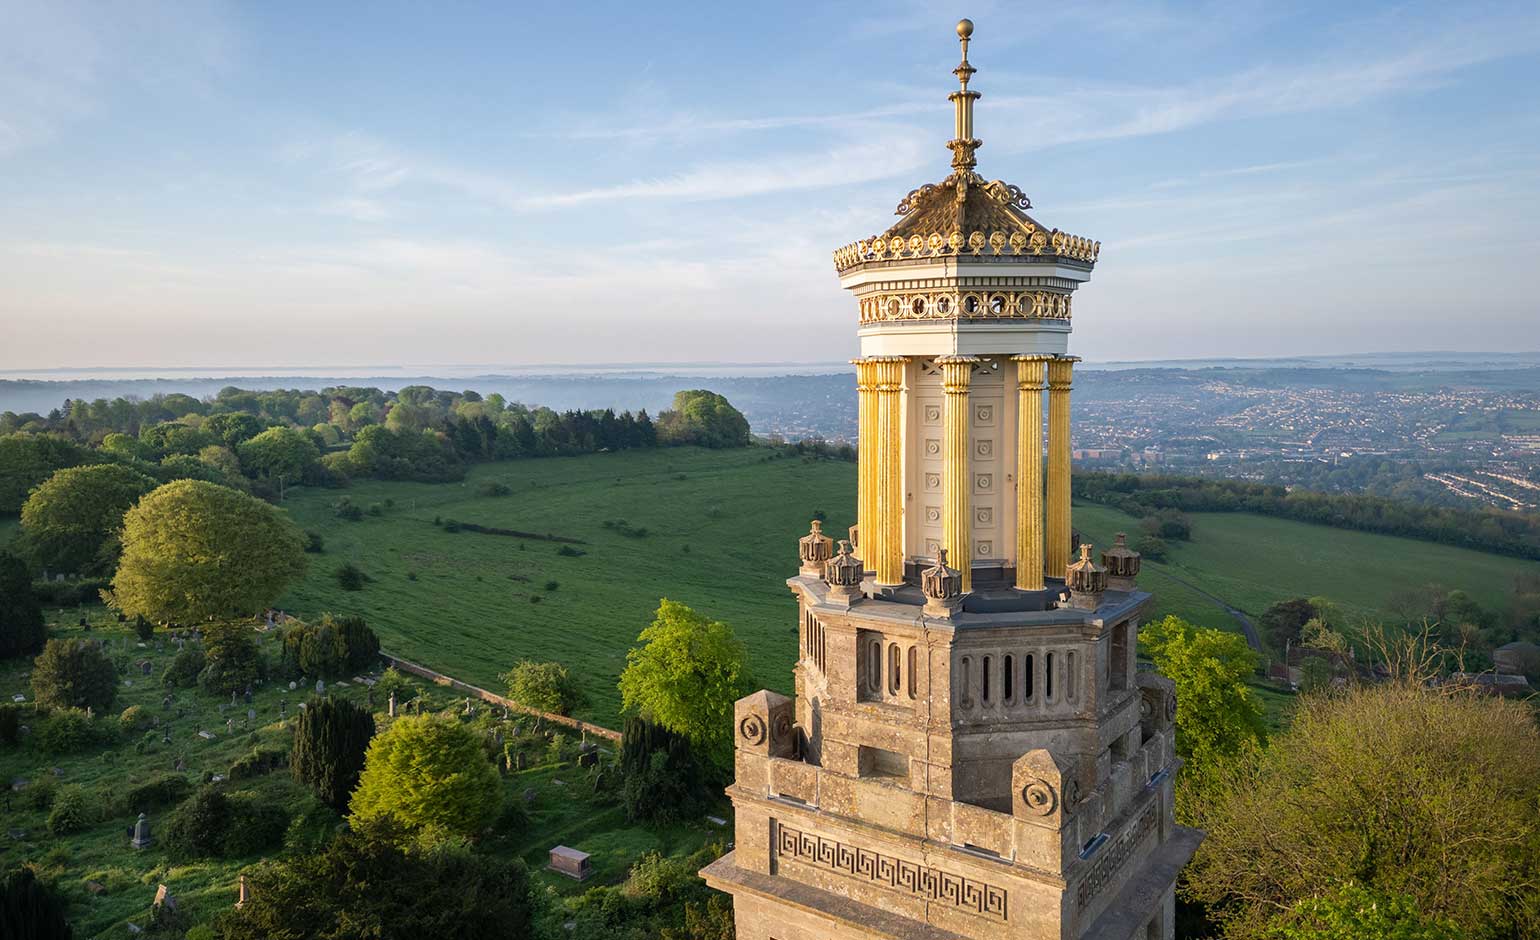 Beckford’s Tower to reopen to the public after £3.9m refurbishment